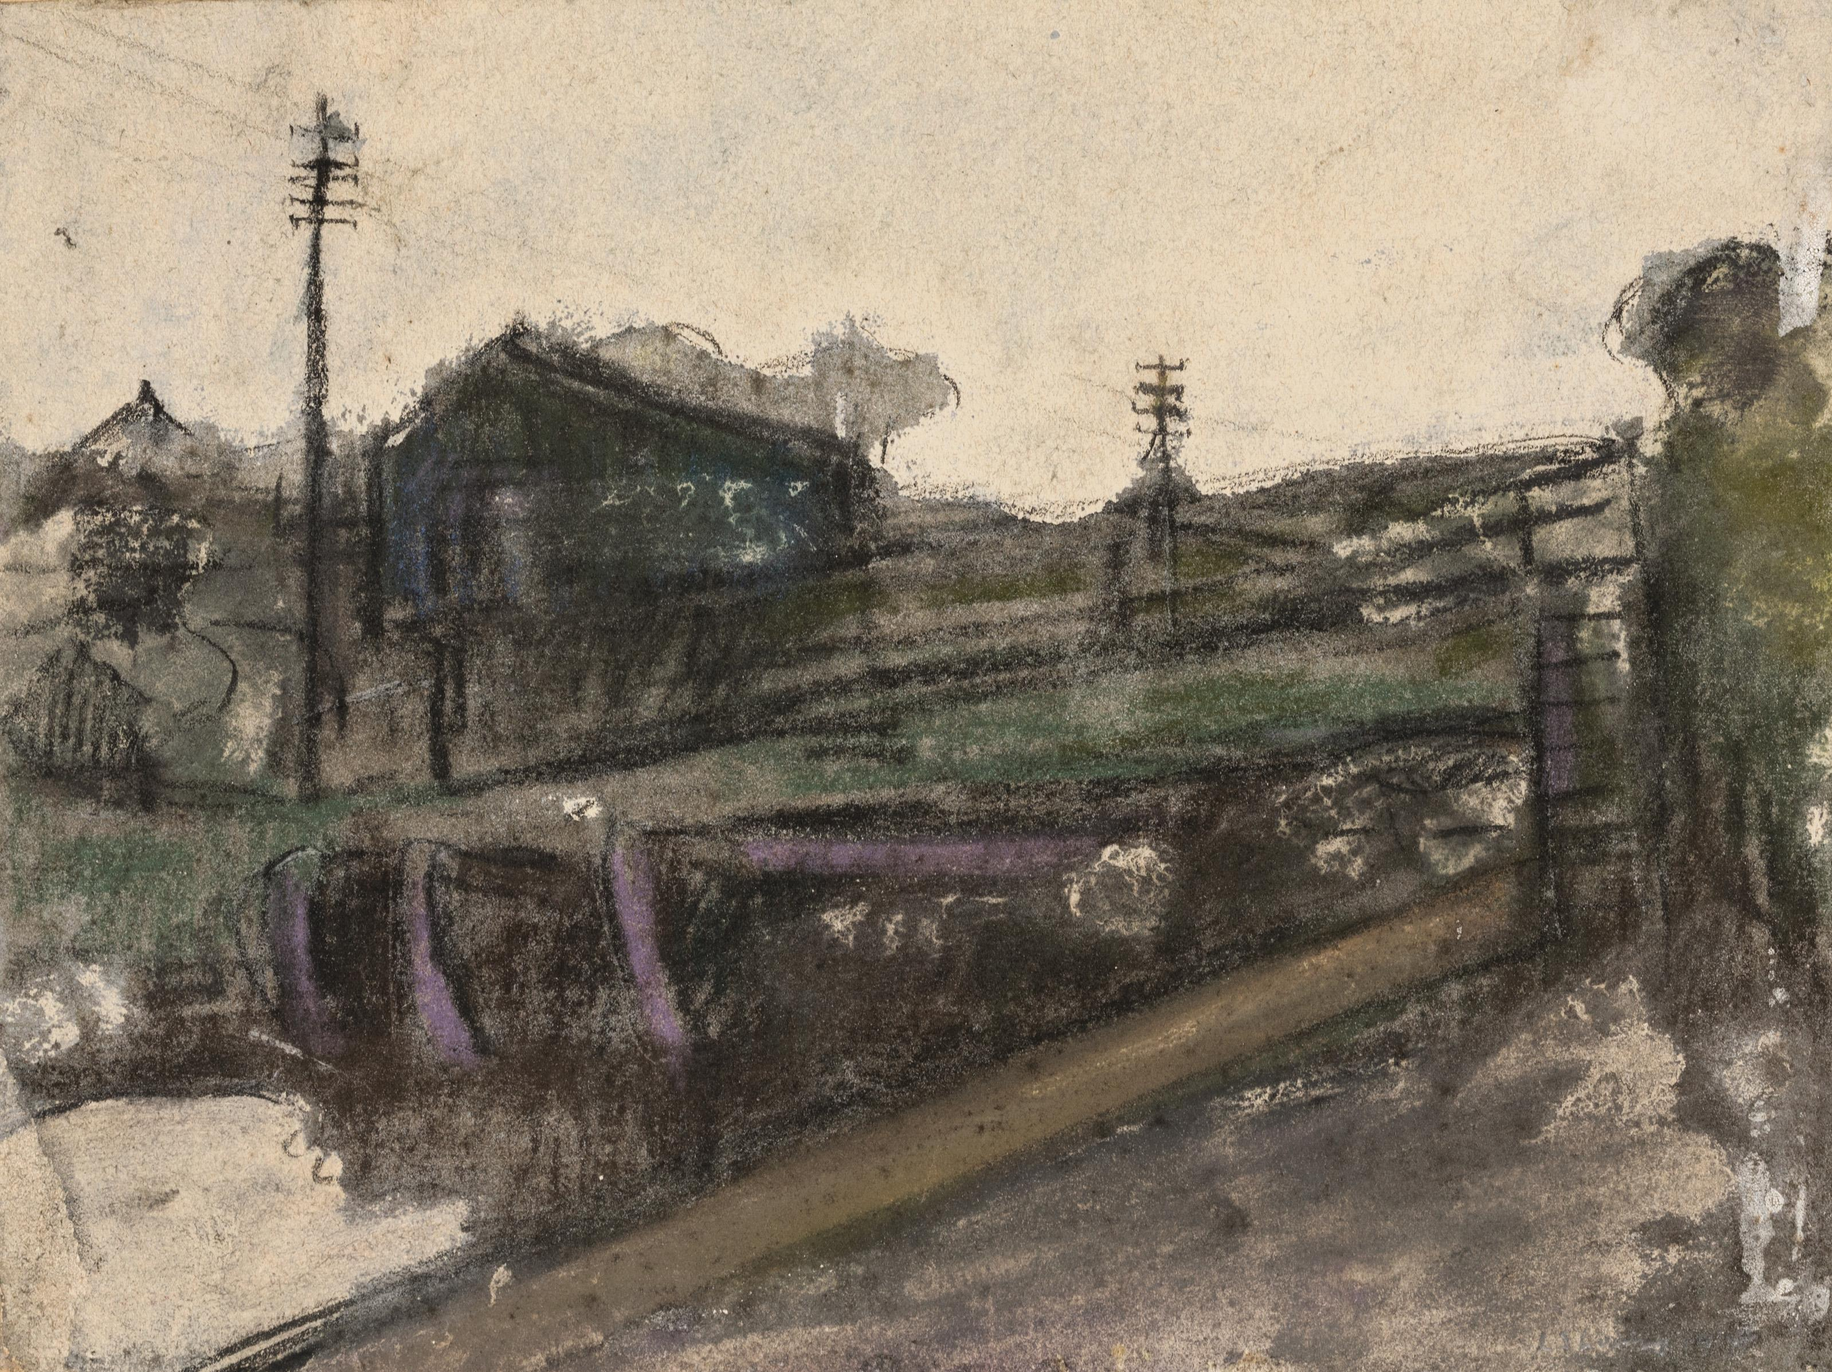 Barges at Clifton Footbridge (indistinctly dated) by Laurence Stephen Lowry (1887 - 1976), English artist.